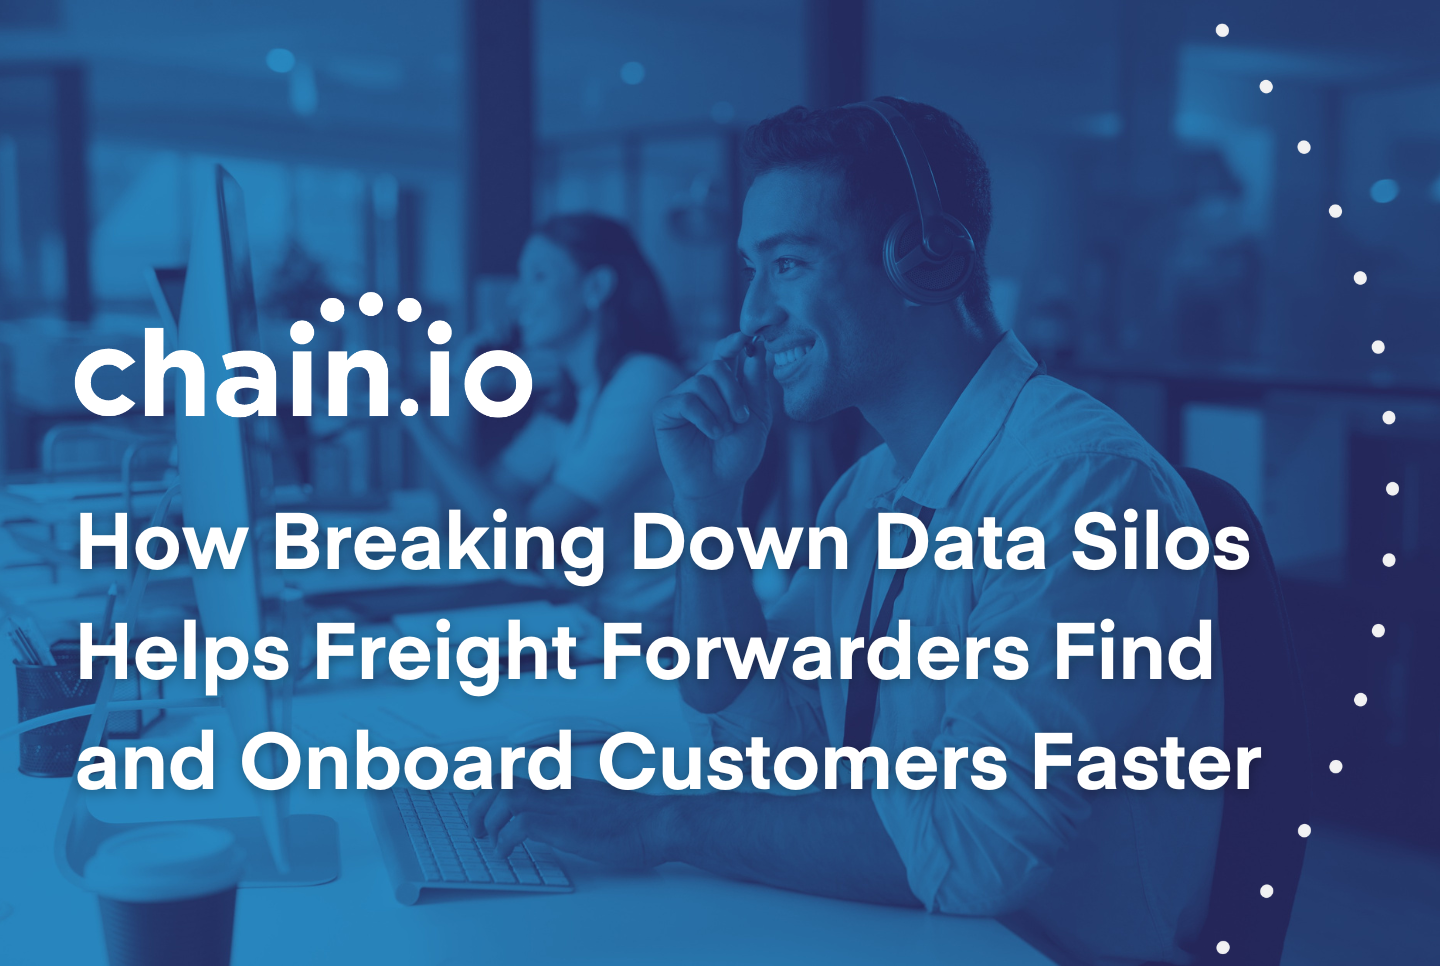 Shipper  customers expect easy and immediate access to the data surrounding all of their shipments. 